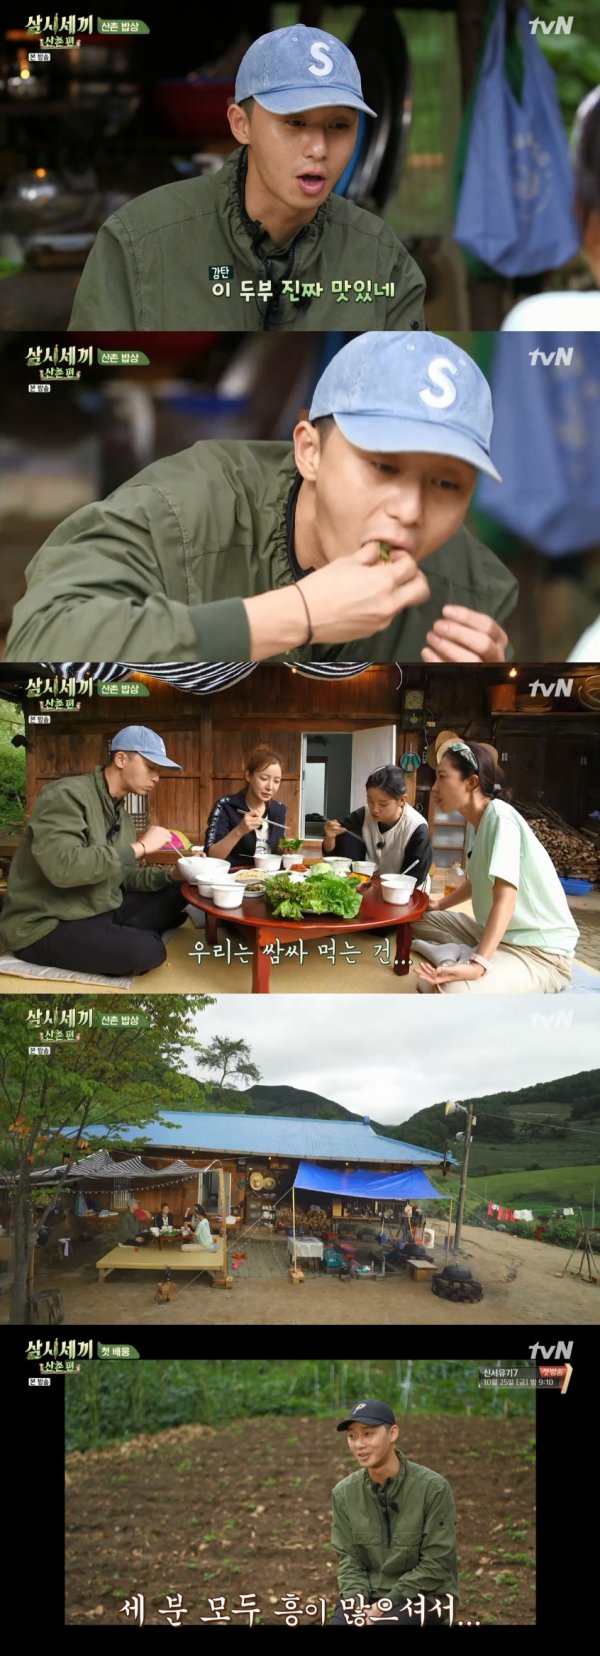 I prepared a healthy table at Three Meals a Day Mountain Village.In the TVN entertainment program Three Meals a Day Mountain Village (hereinafter referred to as Three Meals a Day), which was broadcast on the afternoon of the 18th, there was a scene where Yeom Jung-ah, Yoon Se-ah, Park So-dam and Park Seo-joon were preparing for the late Lunch.On this day, four people prepared Lunch table with various vegetables and miso stew.Park Seo-joon asked, Can I rub with herbs? And then completed his own bibimbap.After that, he said, I have to eat and cook chicken right away. After finishing the meal, each of them cleaned up and Park Seo-joon prepared for Seoul.Park Seo-joon said, All three of you are very excited, so it was so fun.